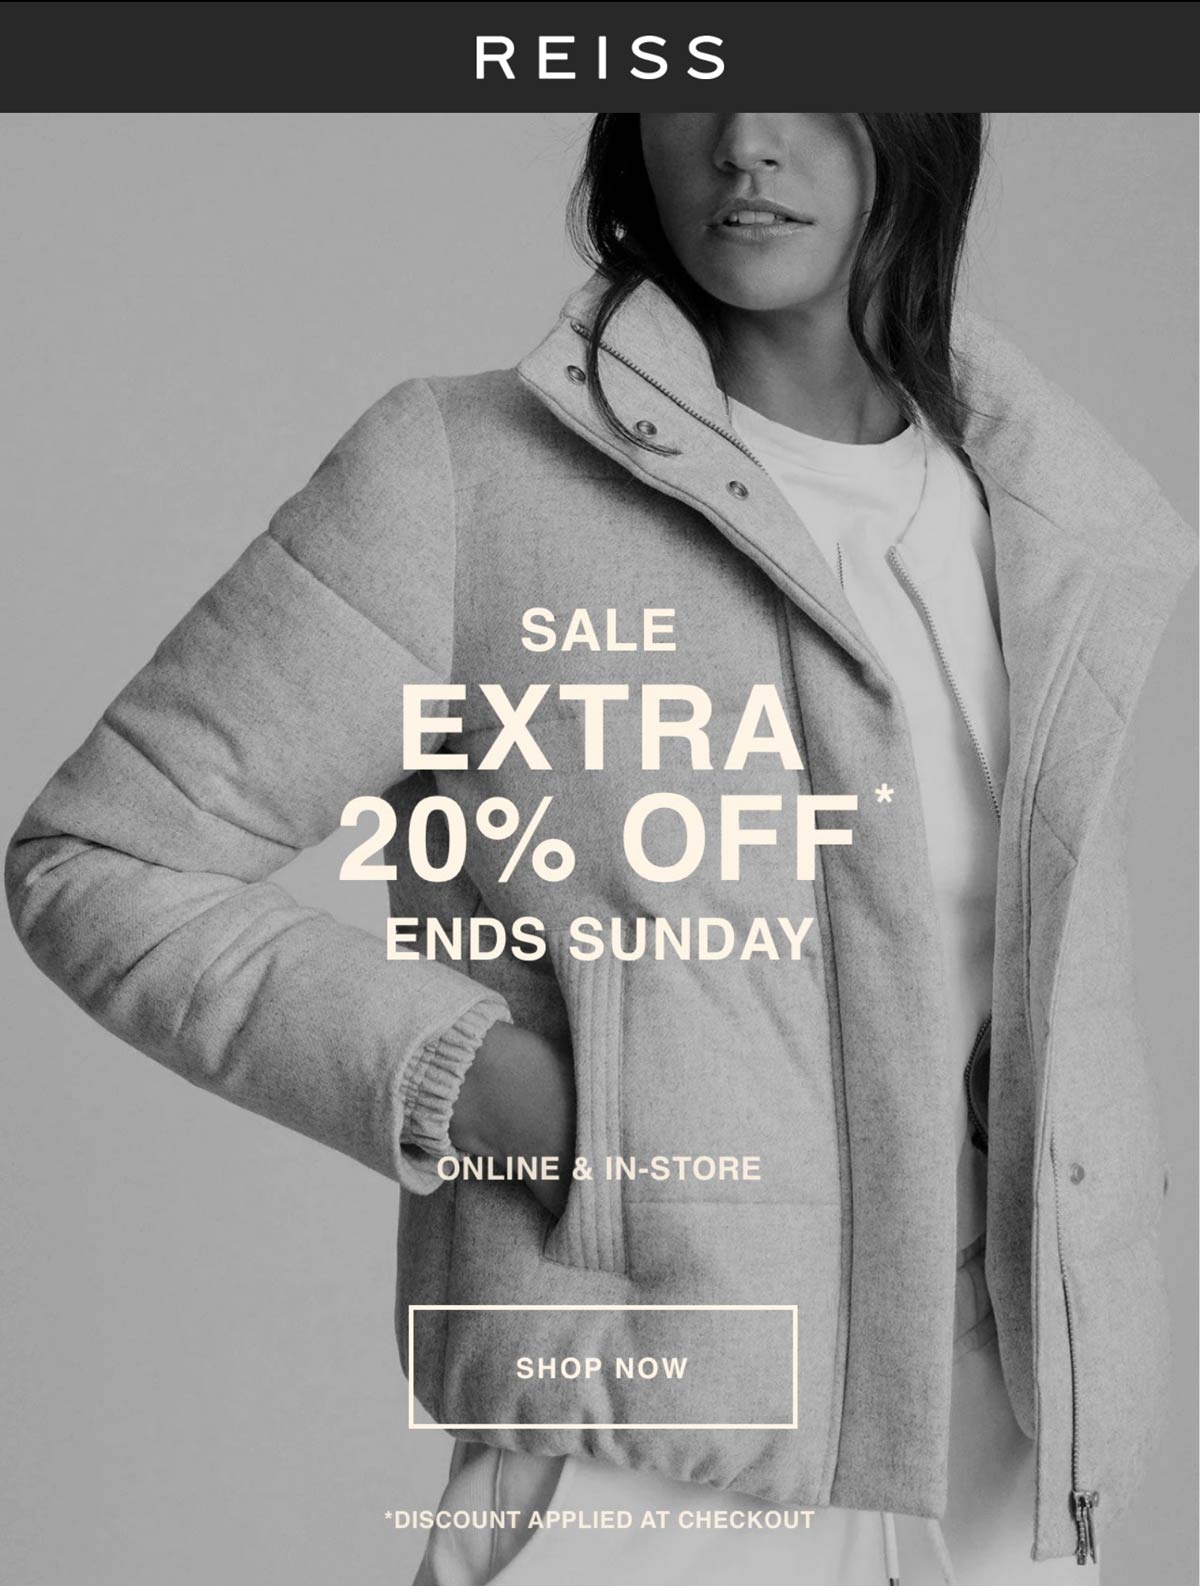 Reiss stores Coupon  Extra 20% off at Reiss, ditto online #reiss 